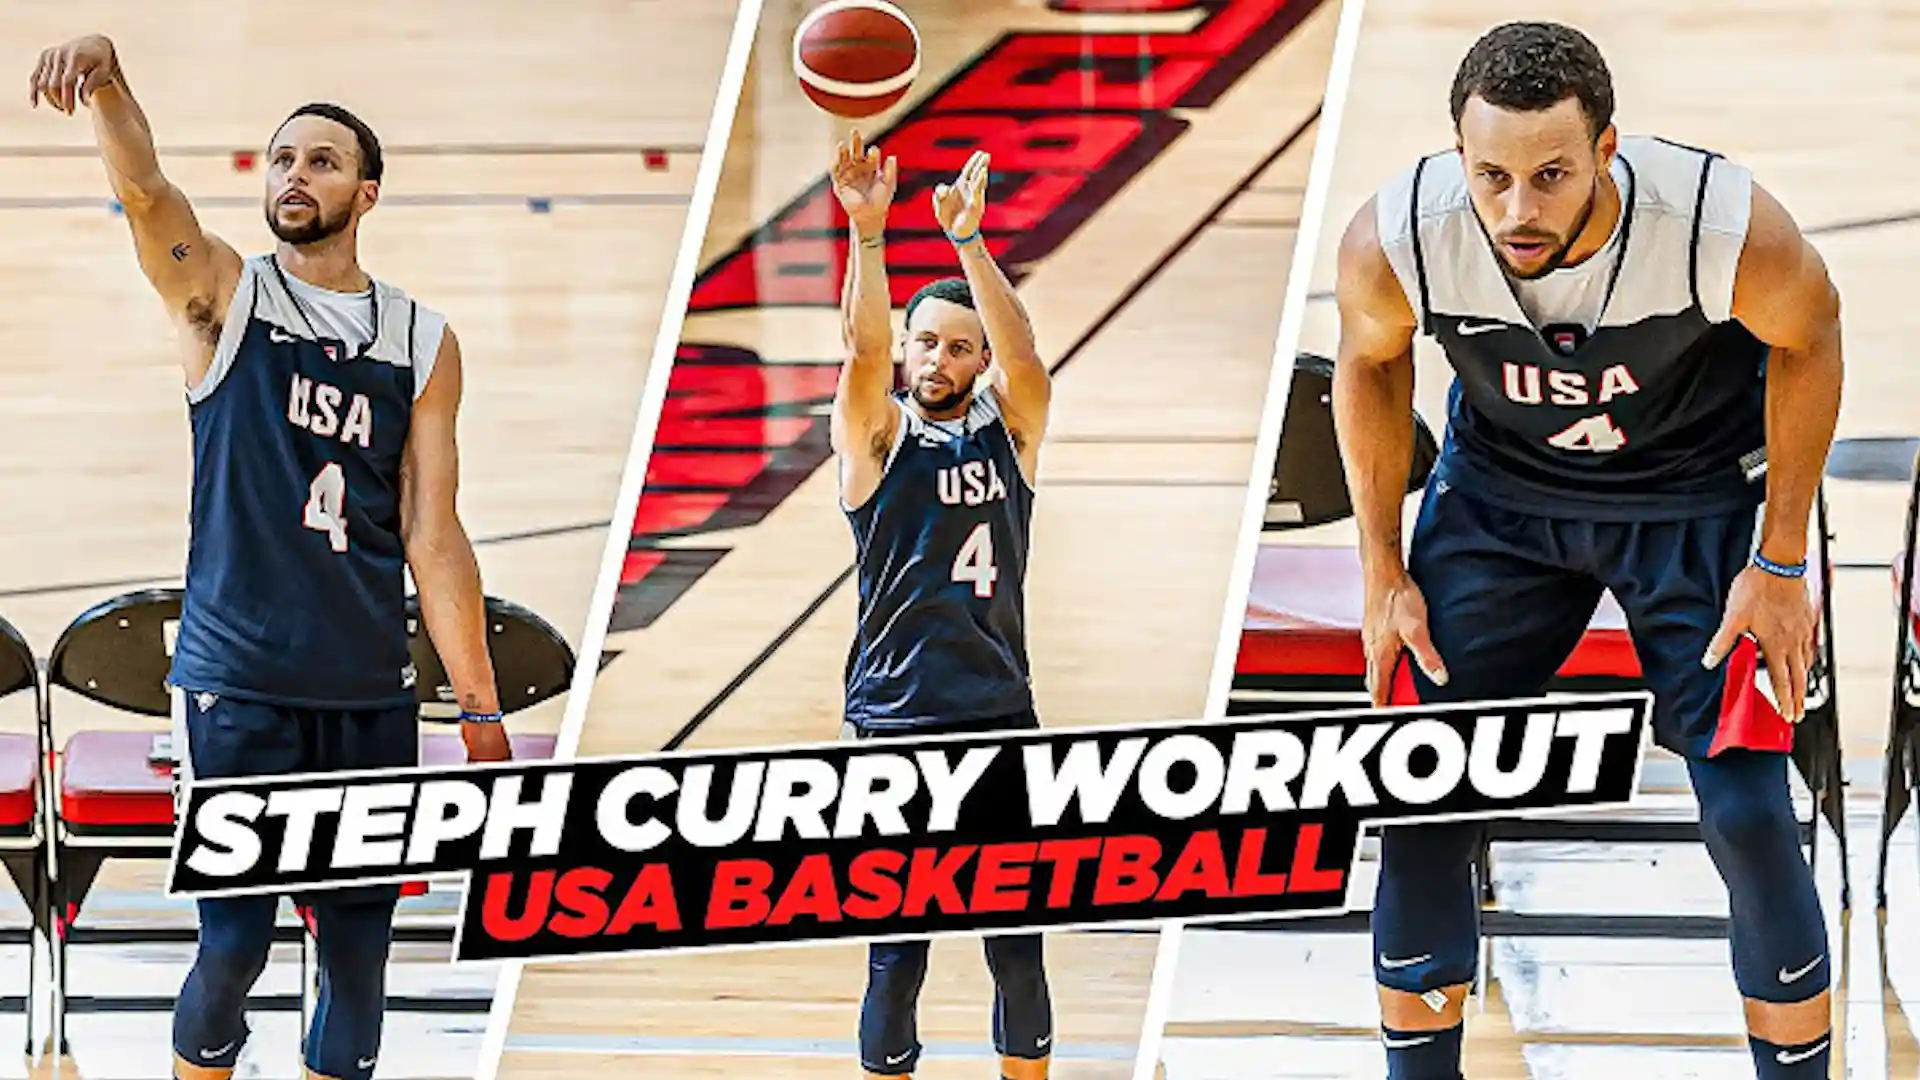 Steph Curry IMPRESSIVE USA Basketball Workout Routine & Shooting Drills